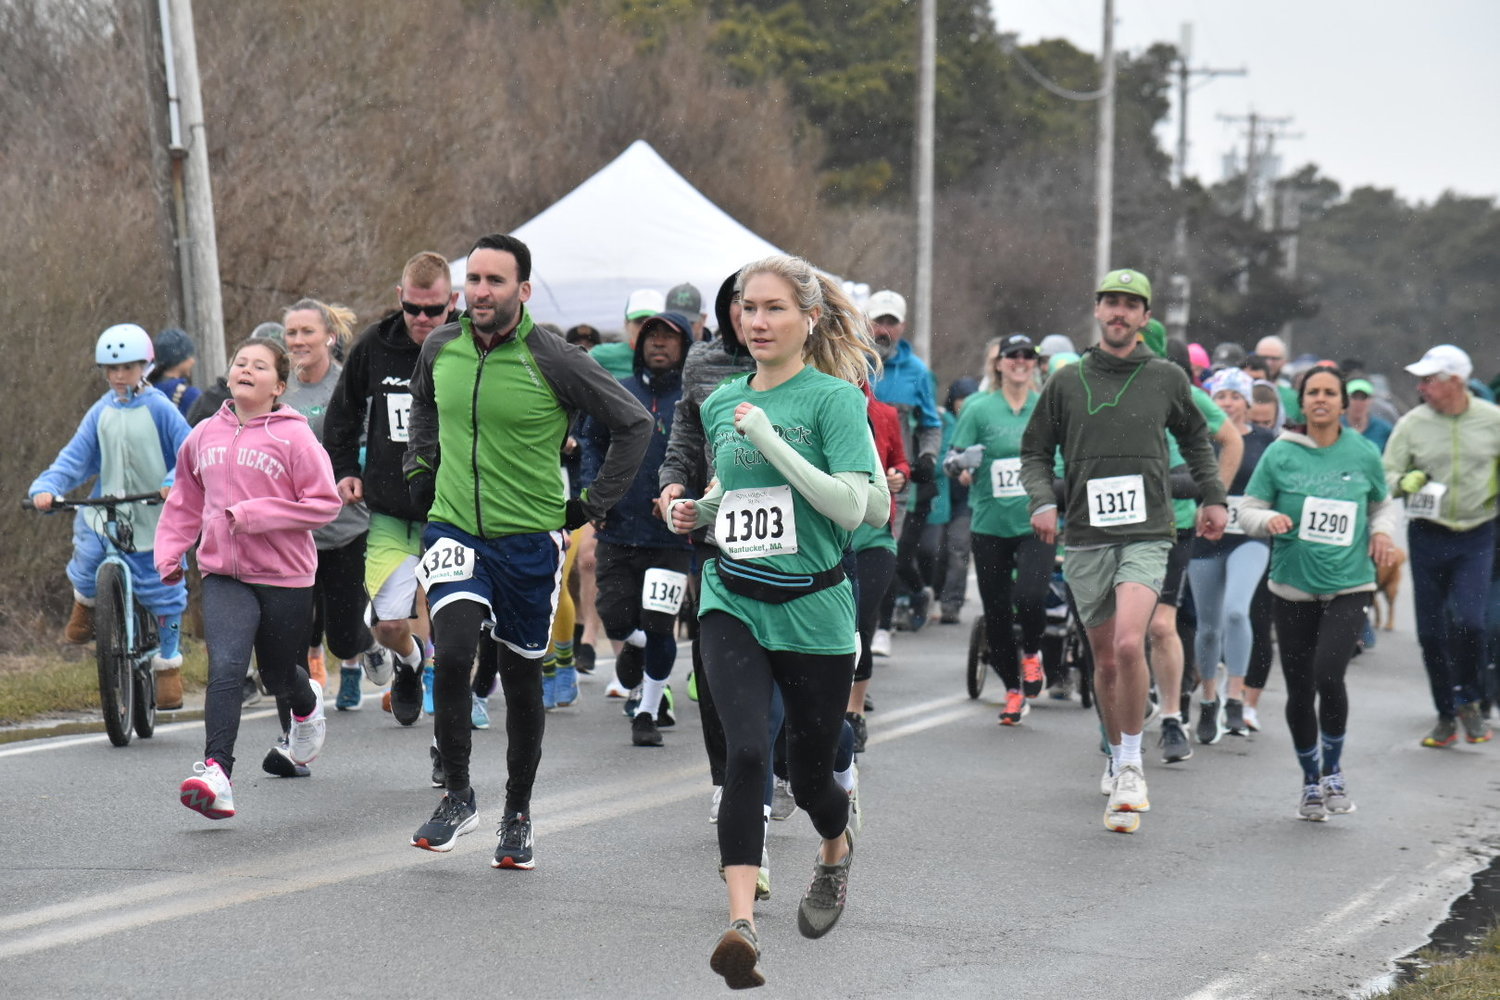 Molly O’Mara (1303) leads a pack of runners and walkers at the start of Saturday’s ShamRock Run.